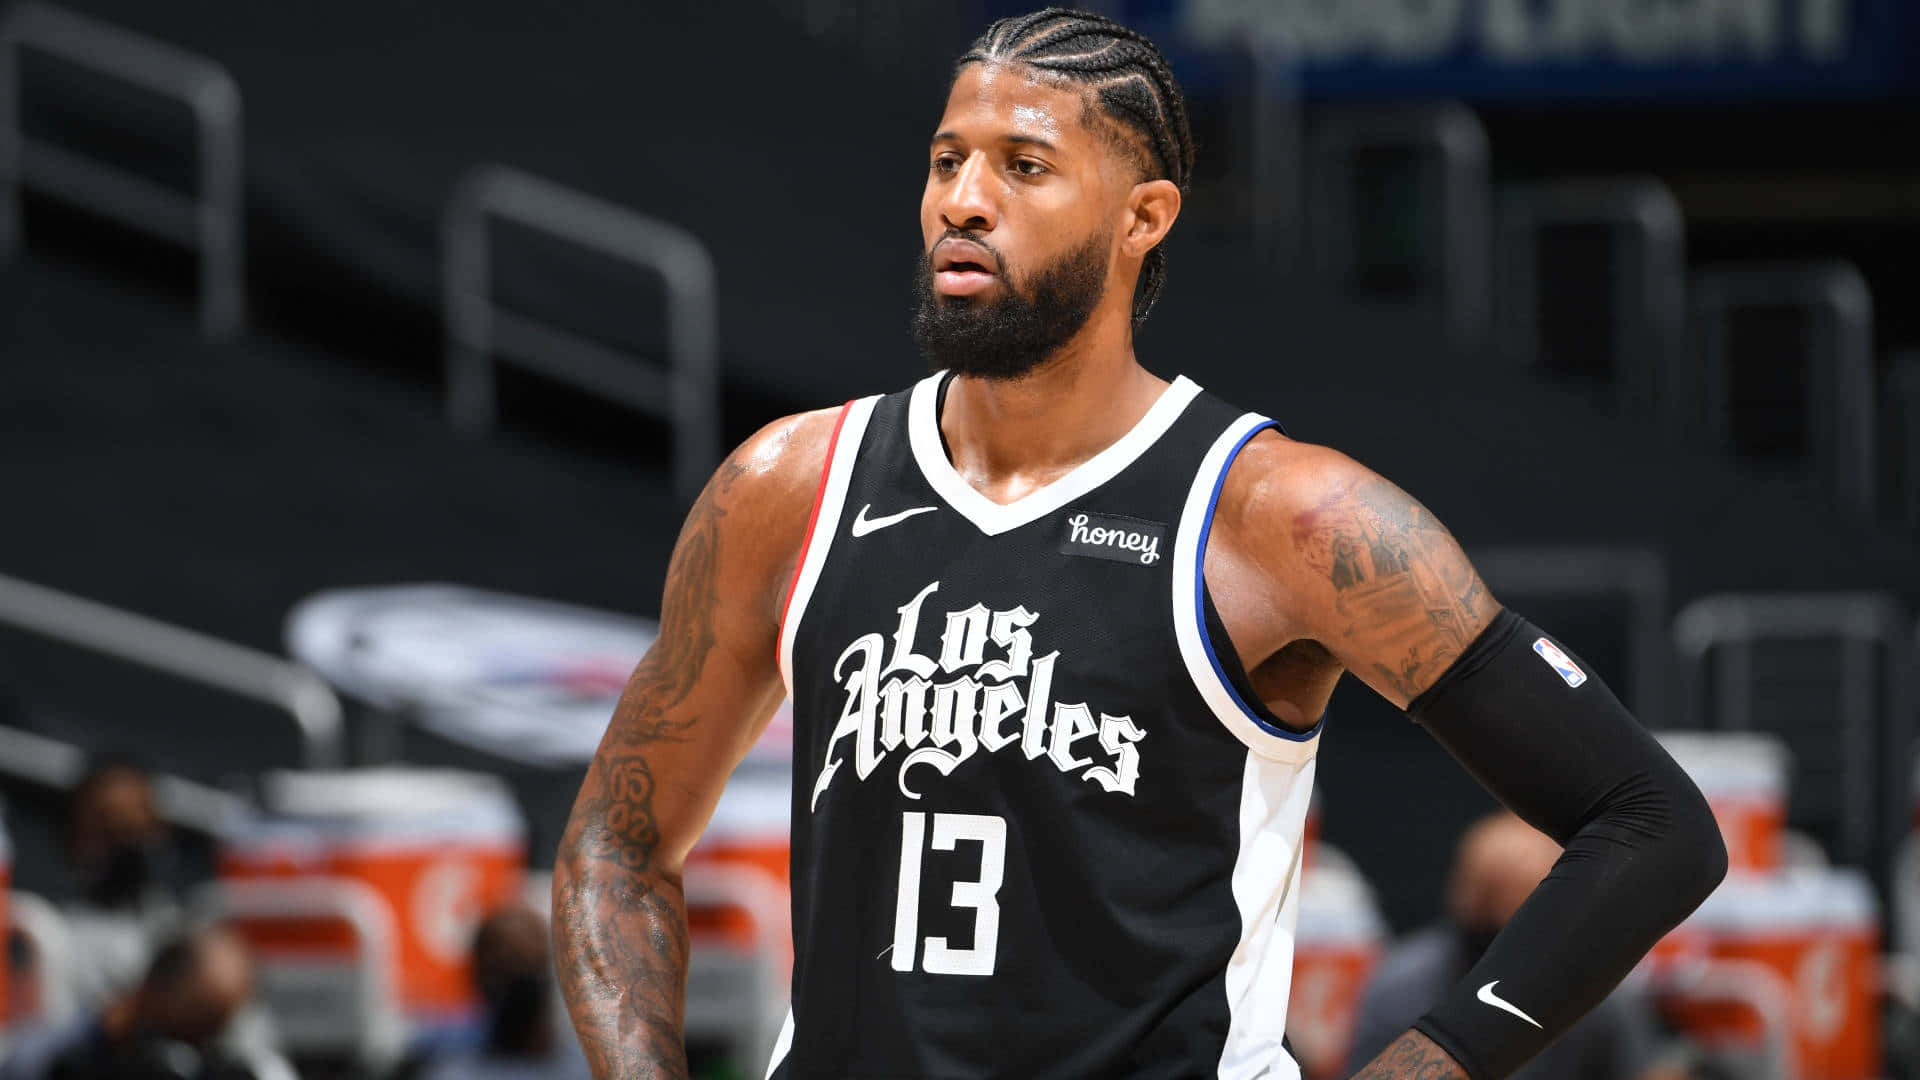 NBA Trade Buzz: Los Angeles Clippers to Trade Paul George to Cleveland Cavaliers in Bold Trade Deal